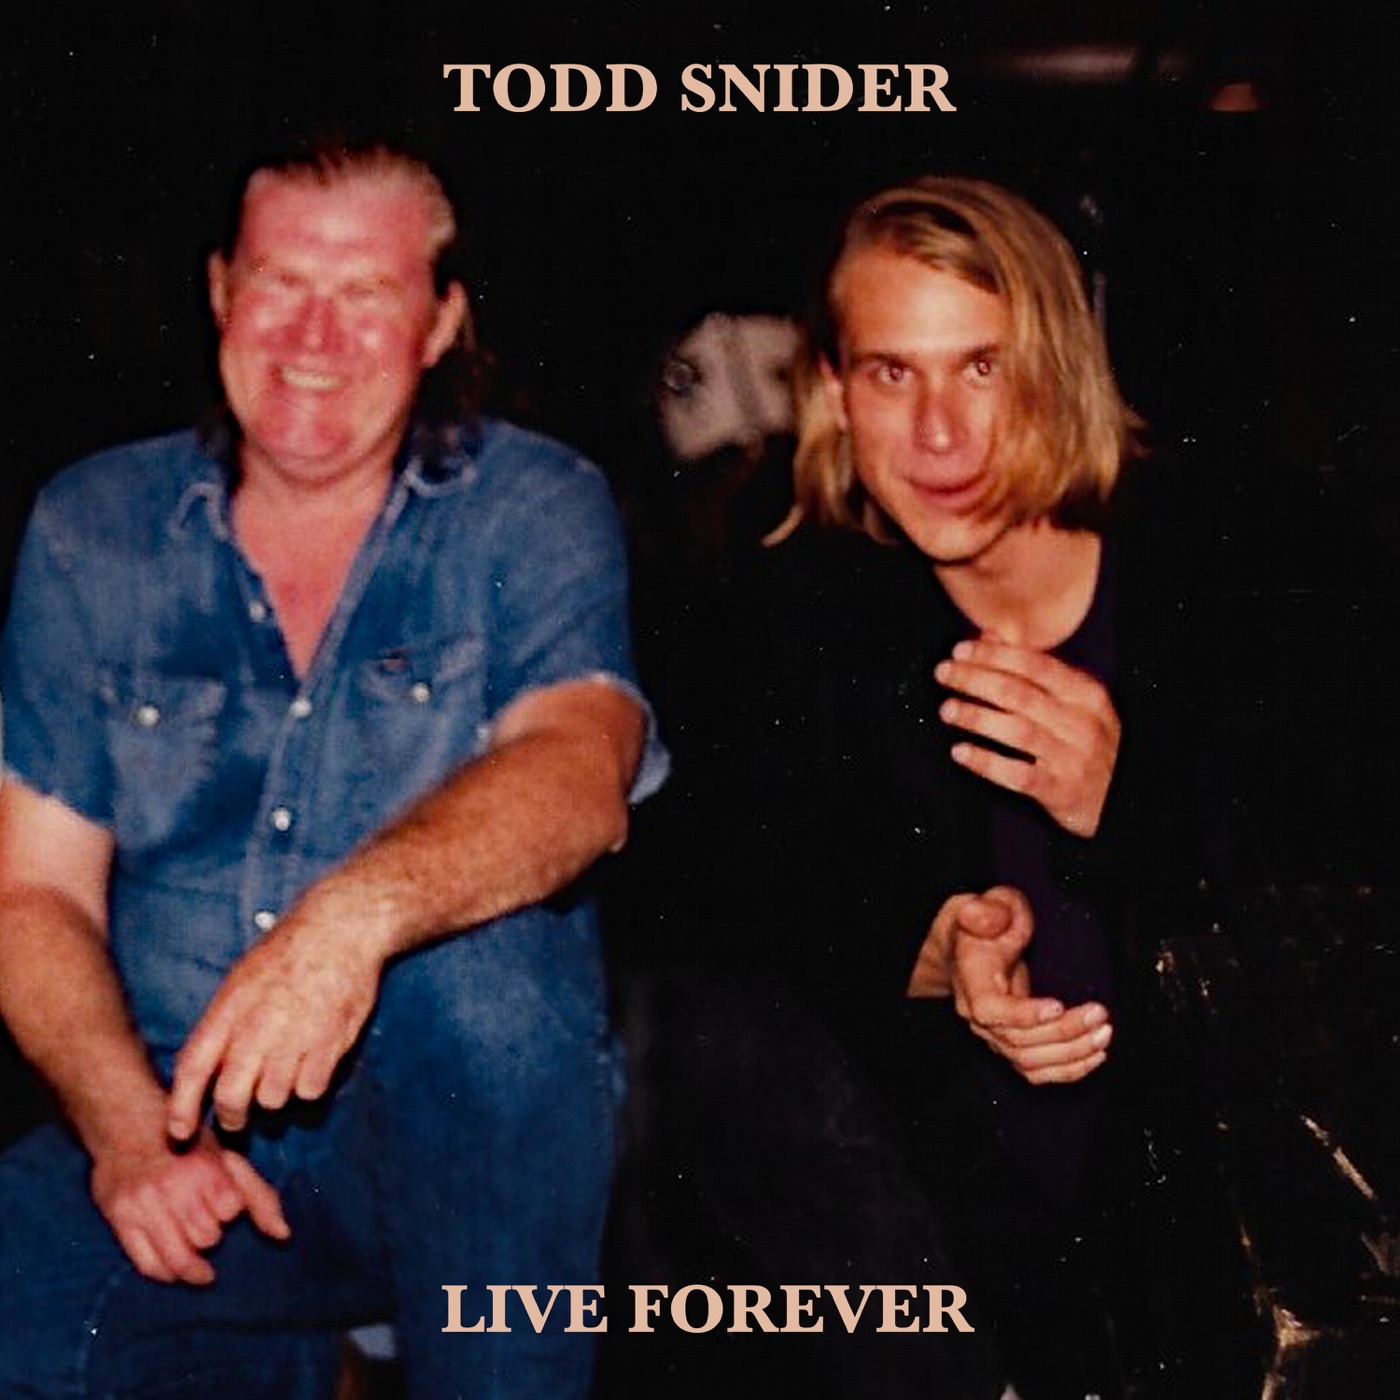 Live Forever by Todd Snider